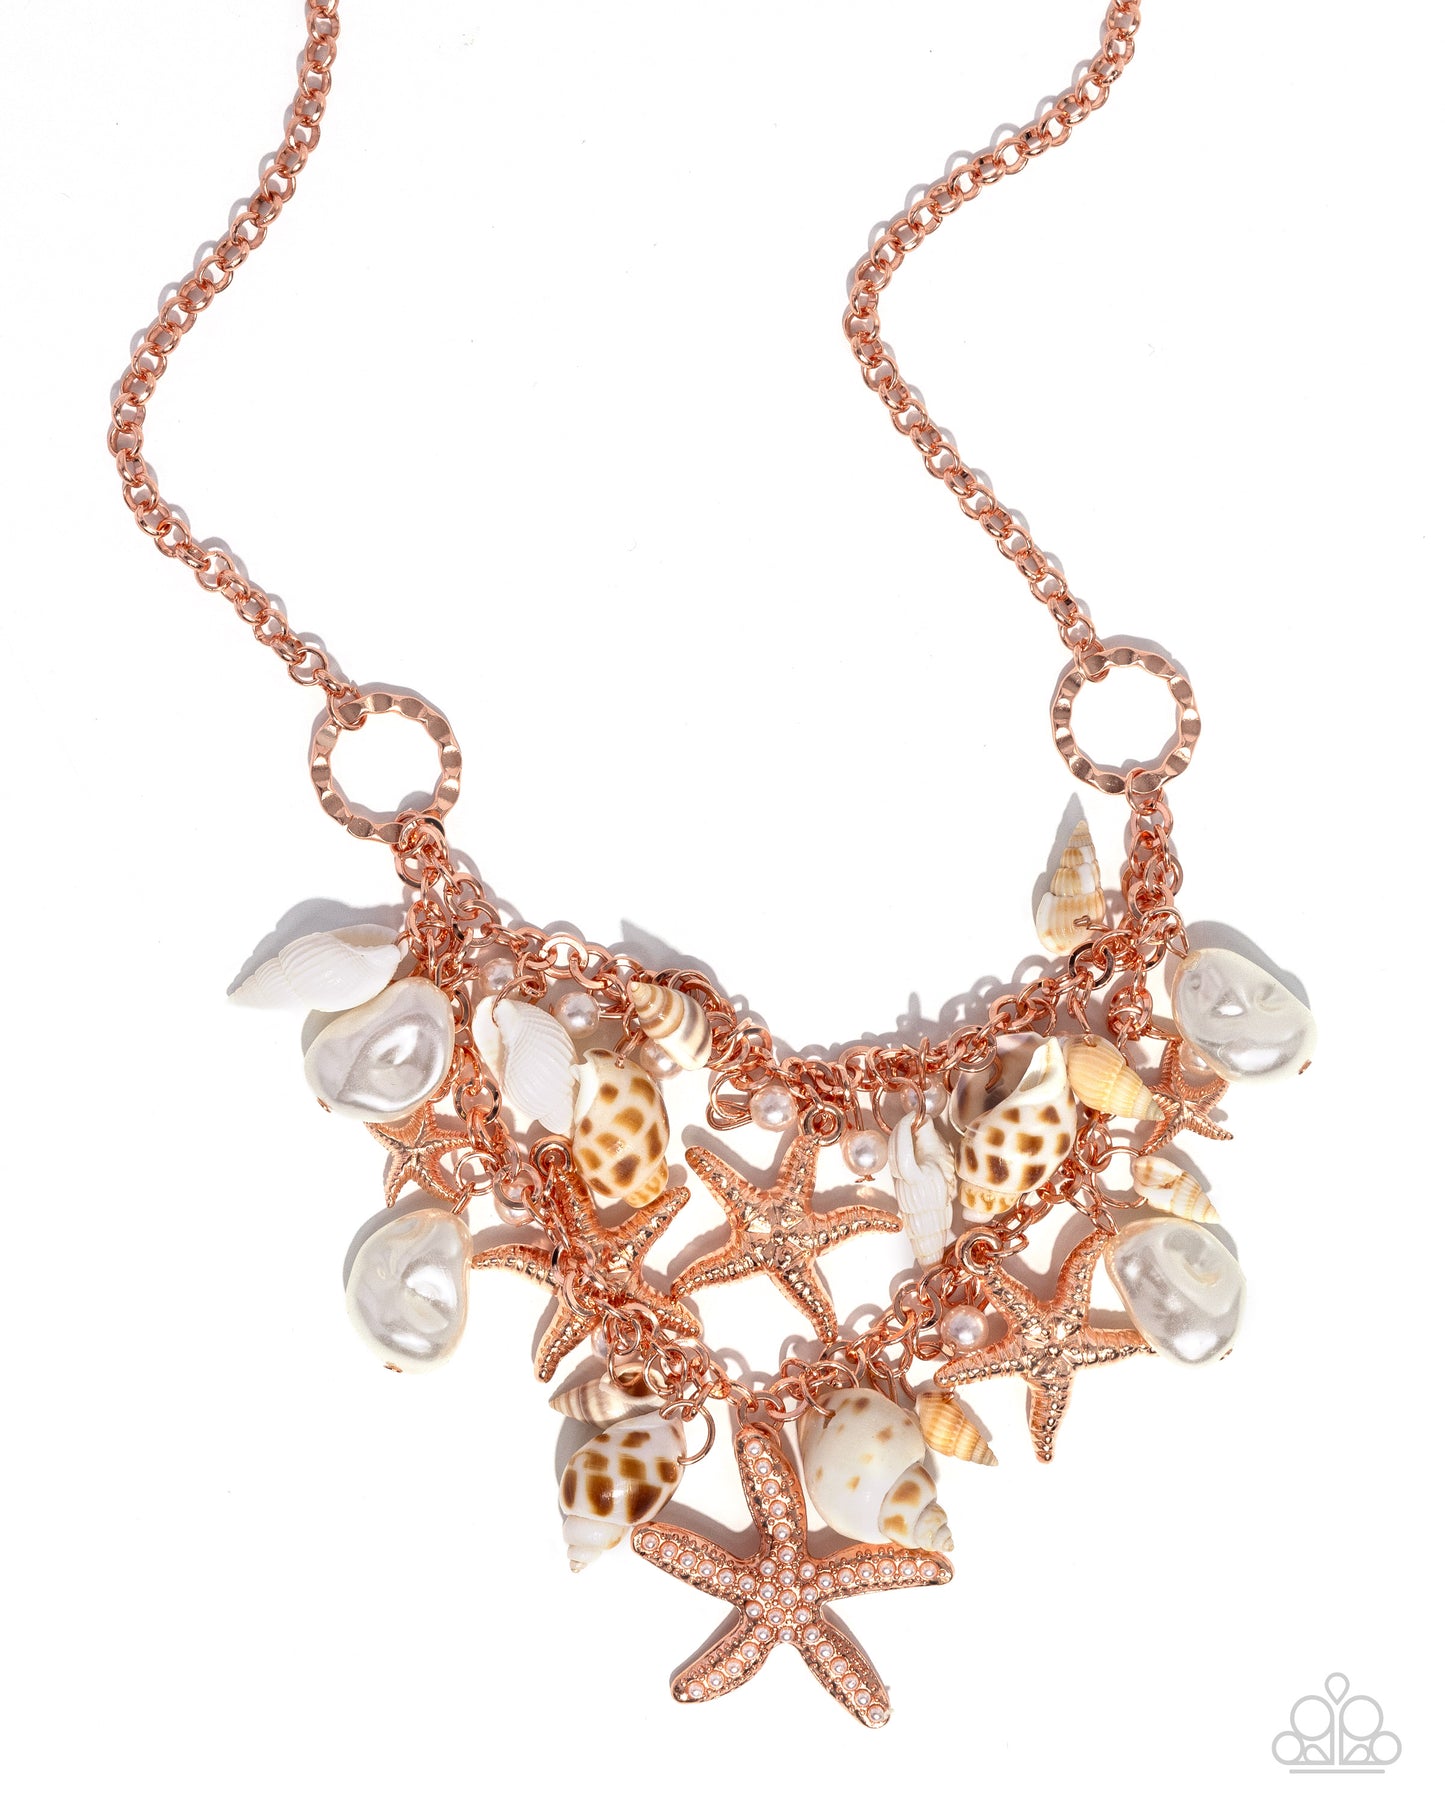 Seashell Shanty - Copper Starfish/Beach Inspired Accents Paparazzi Necklace & matching earrings